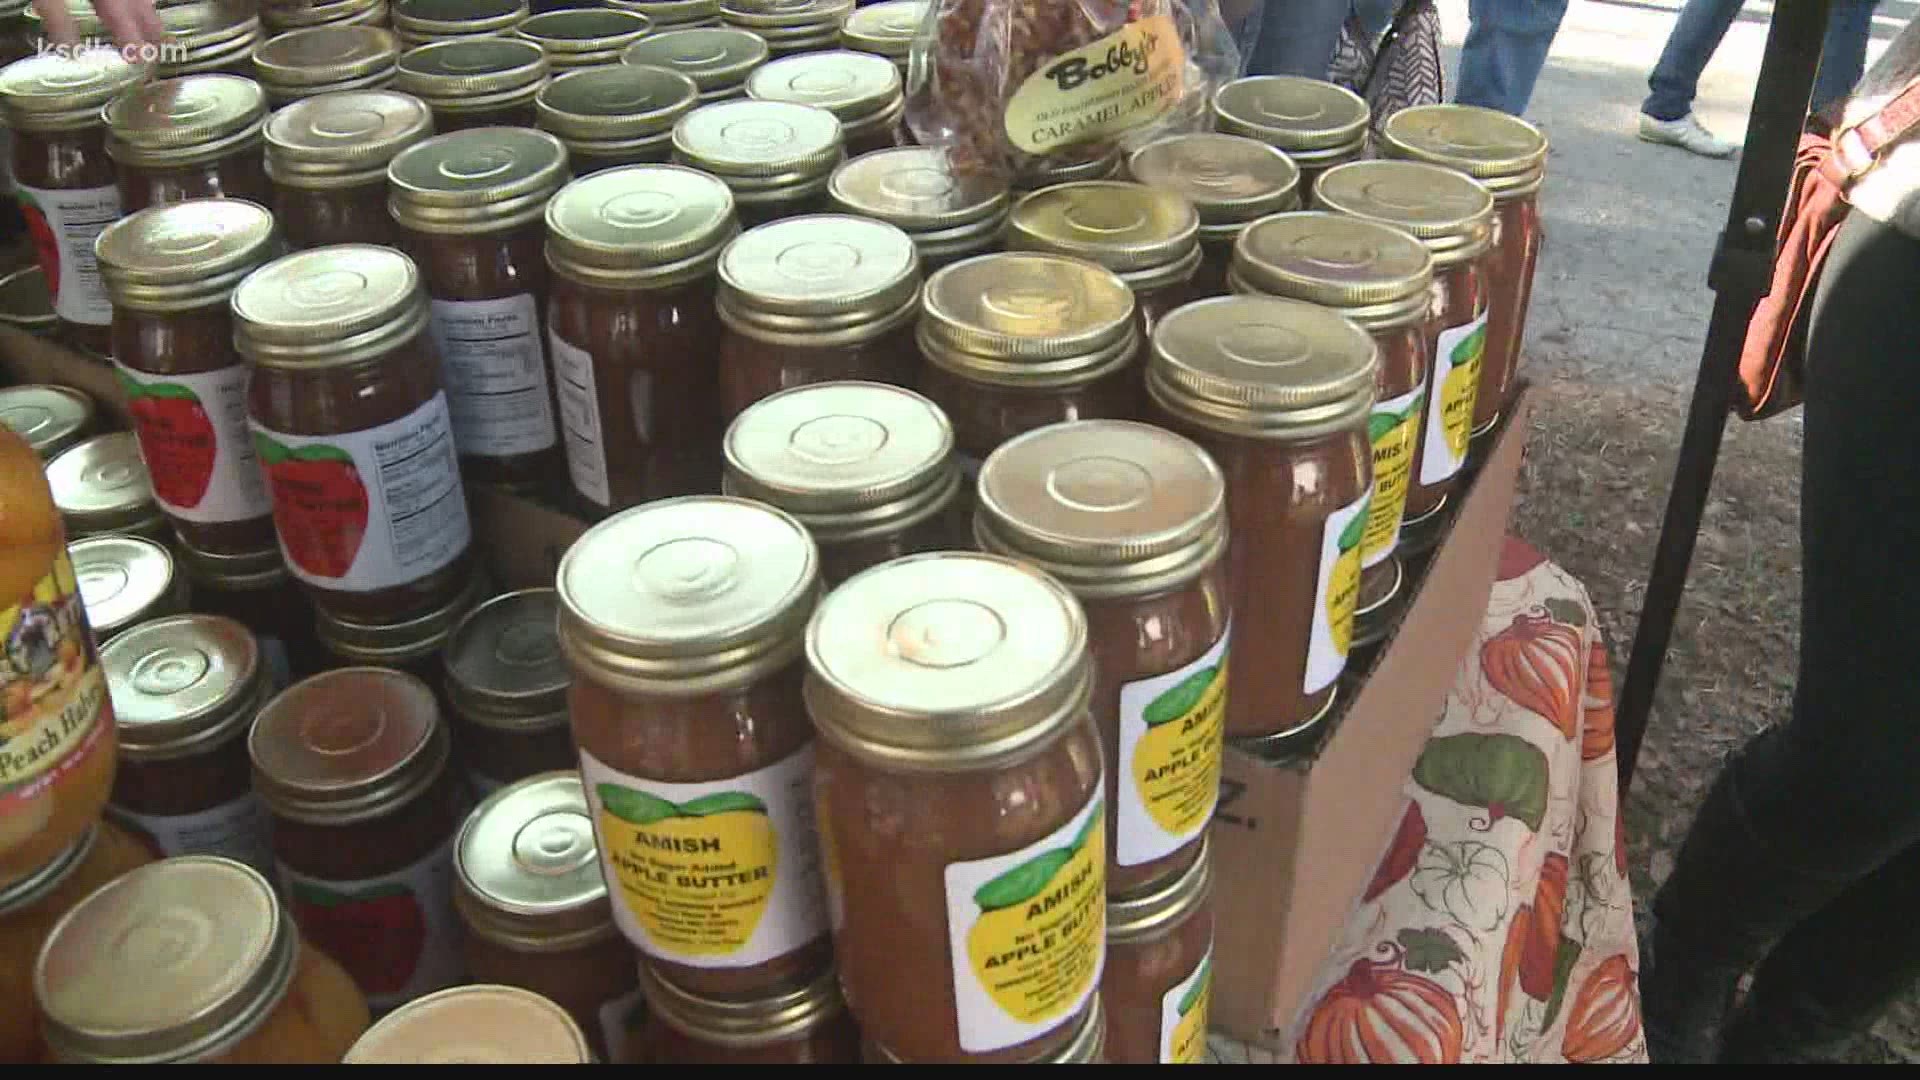 80% of the city's revenue comes from the Apple Butter Festival